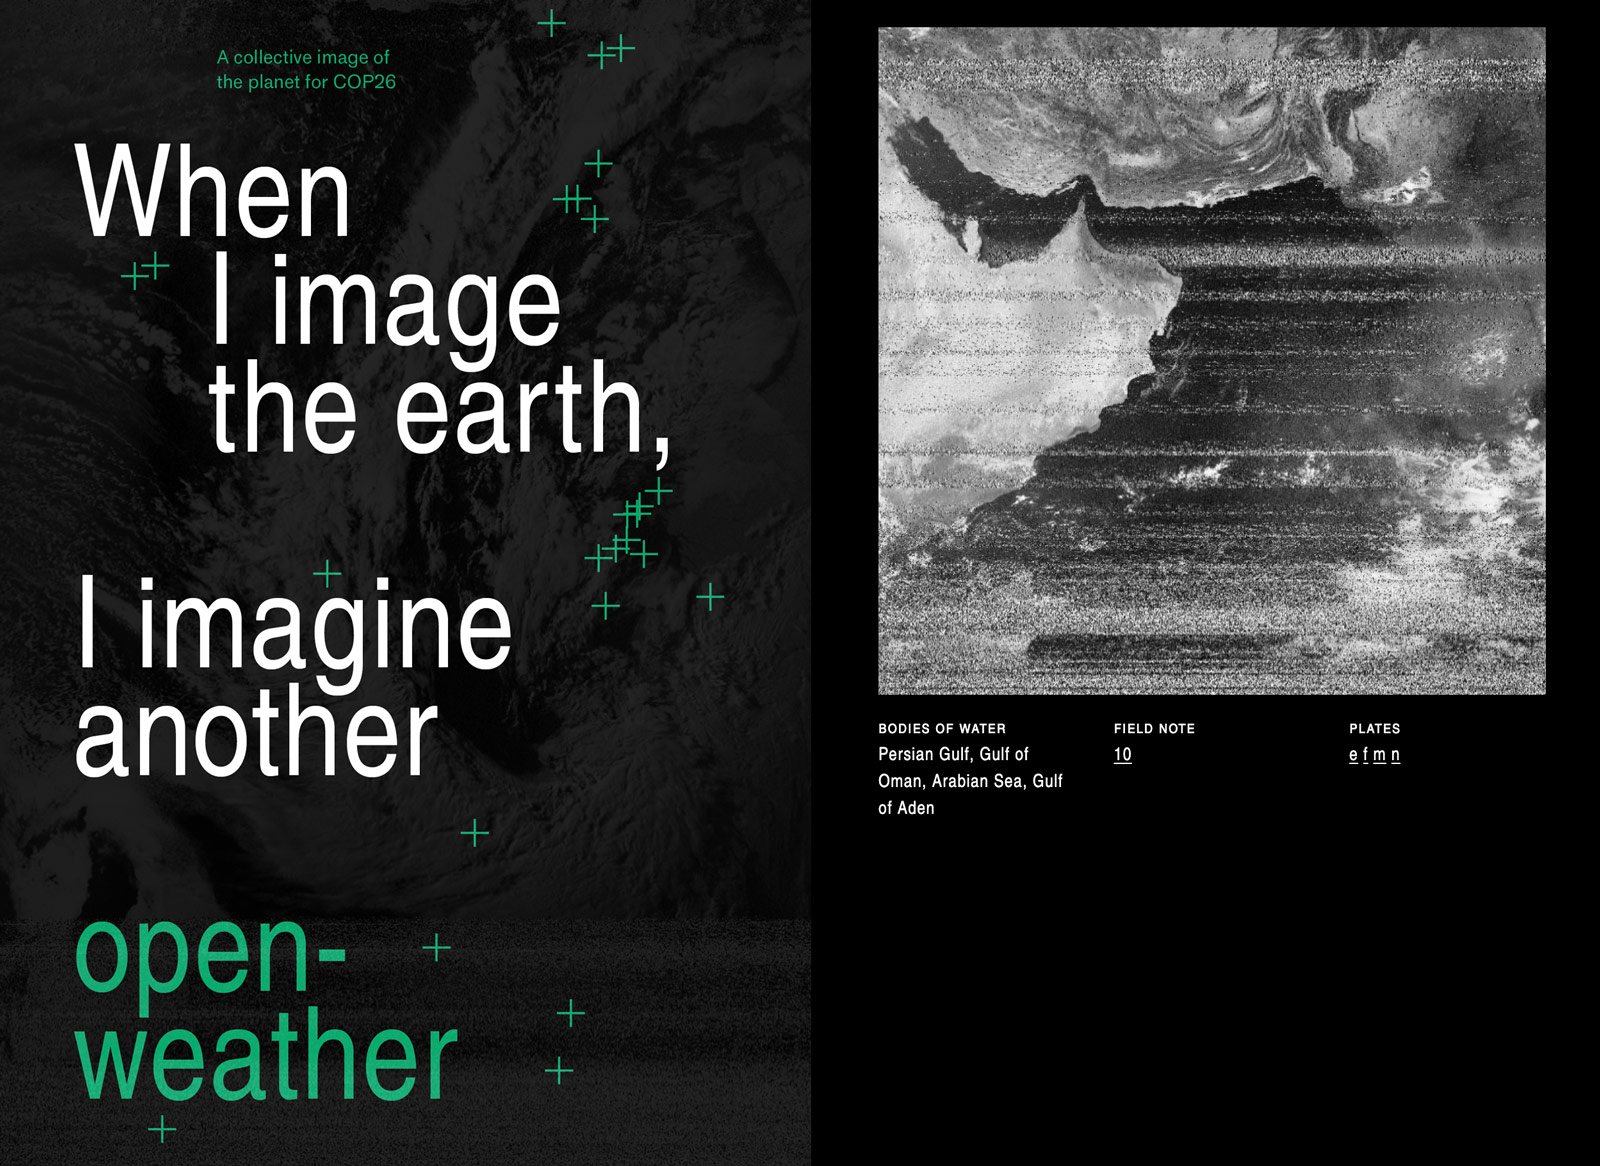 Pages from open weather ebook showing the title and a ground station image of the earth